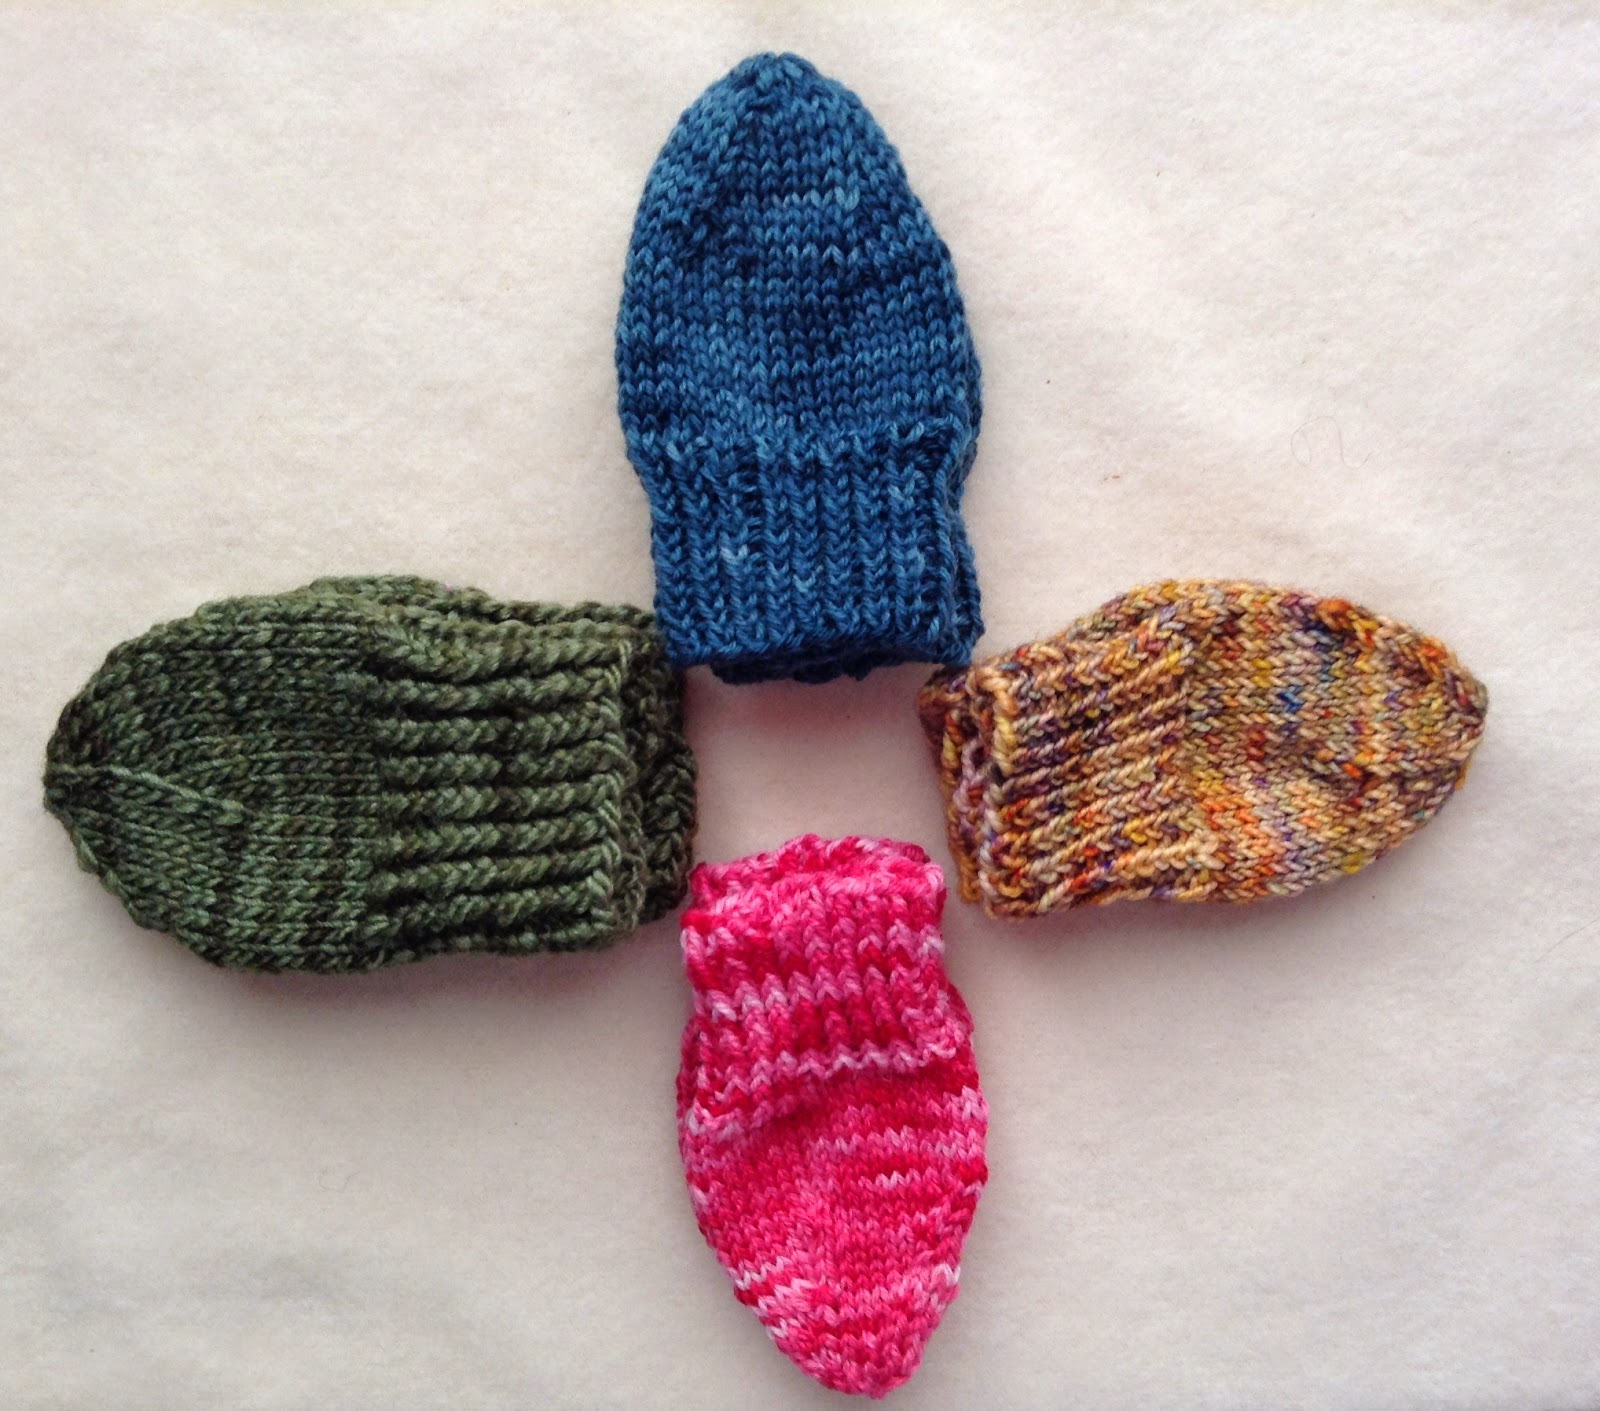 Knitting for Peace: Infant Mitts II